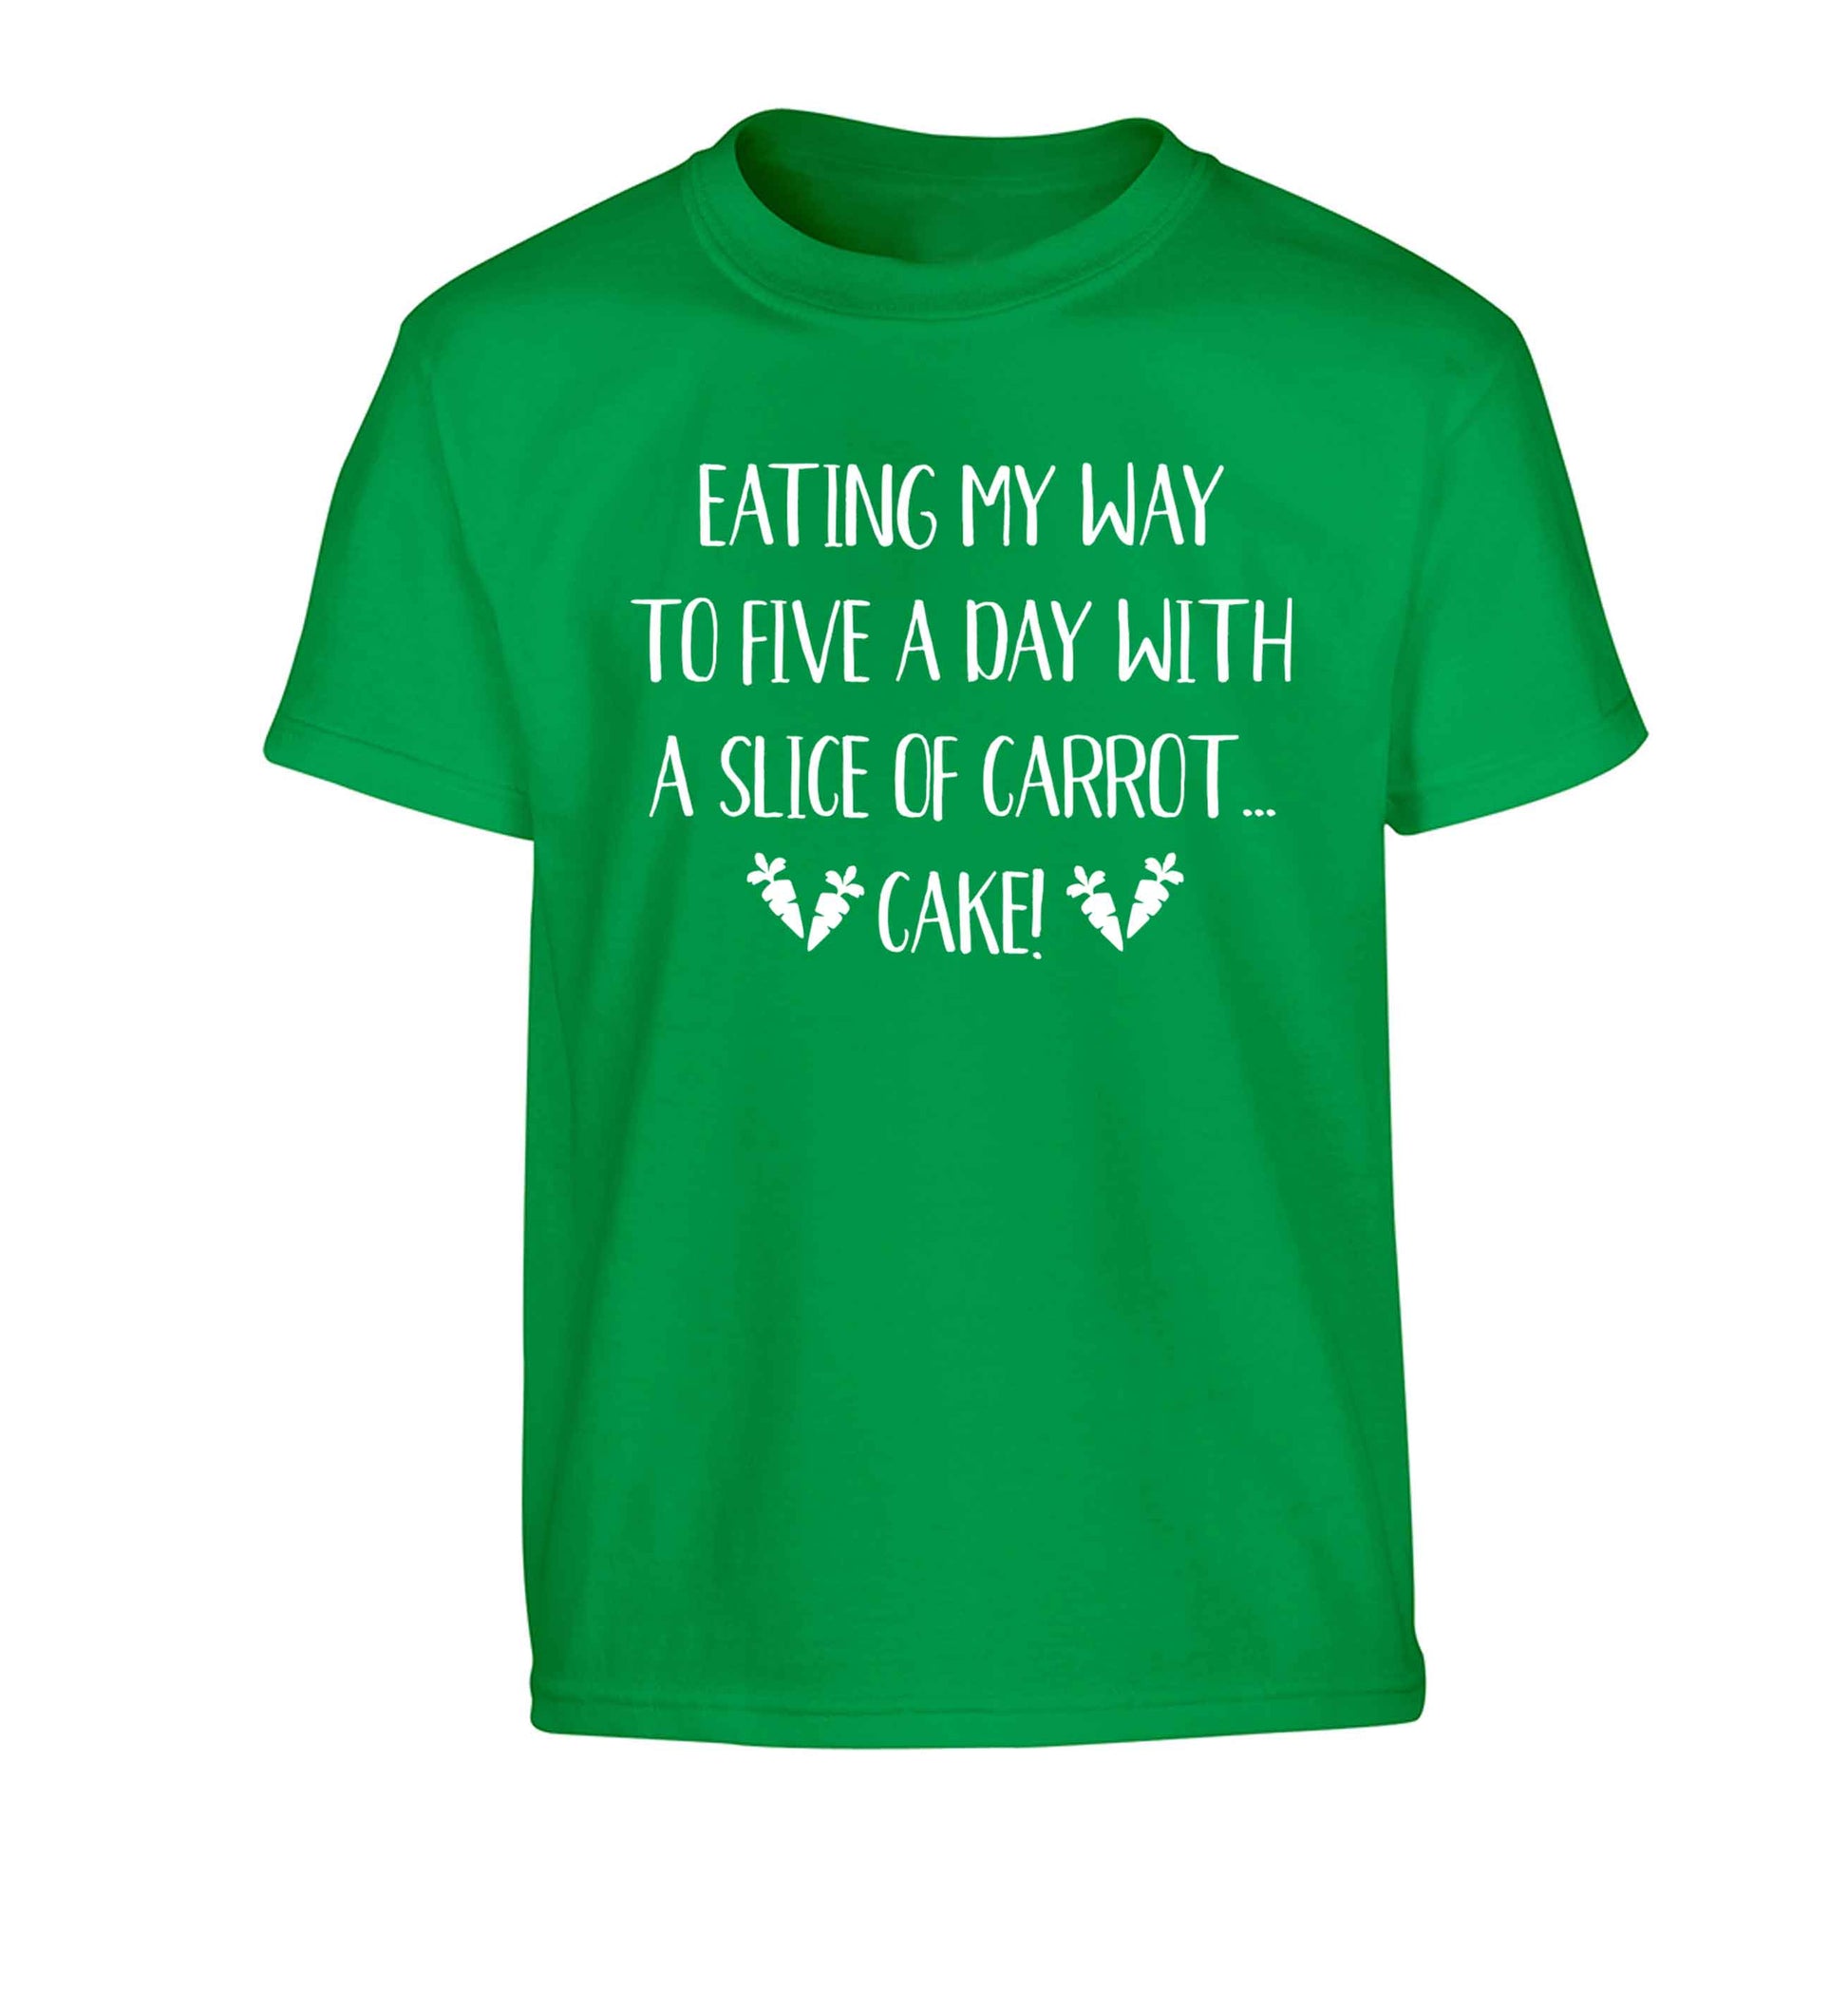 Eating my way to five a day with a slice of carrot cake day Children's green Tshirt 12-13 Years